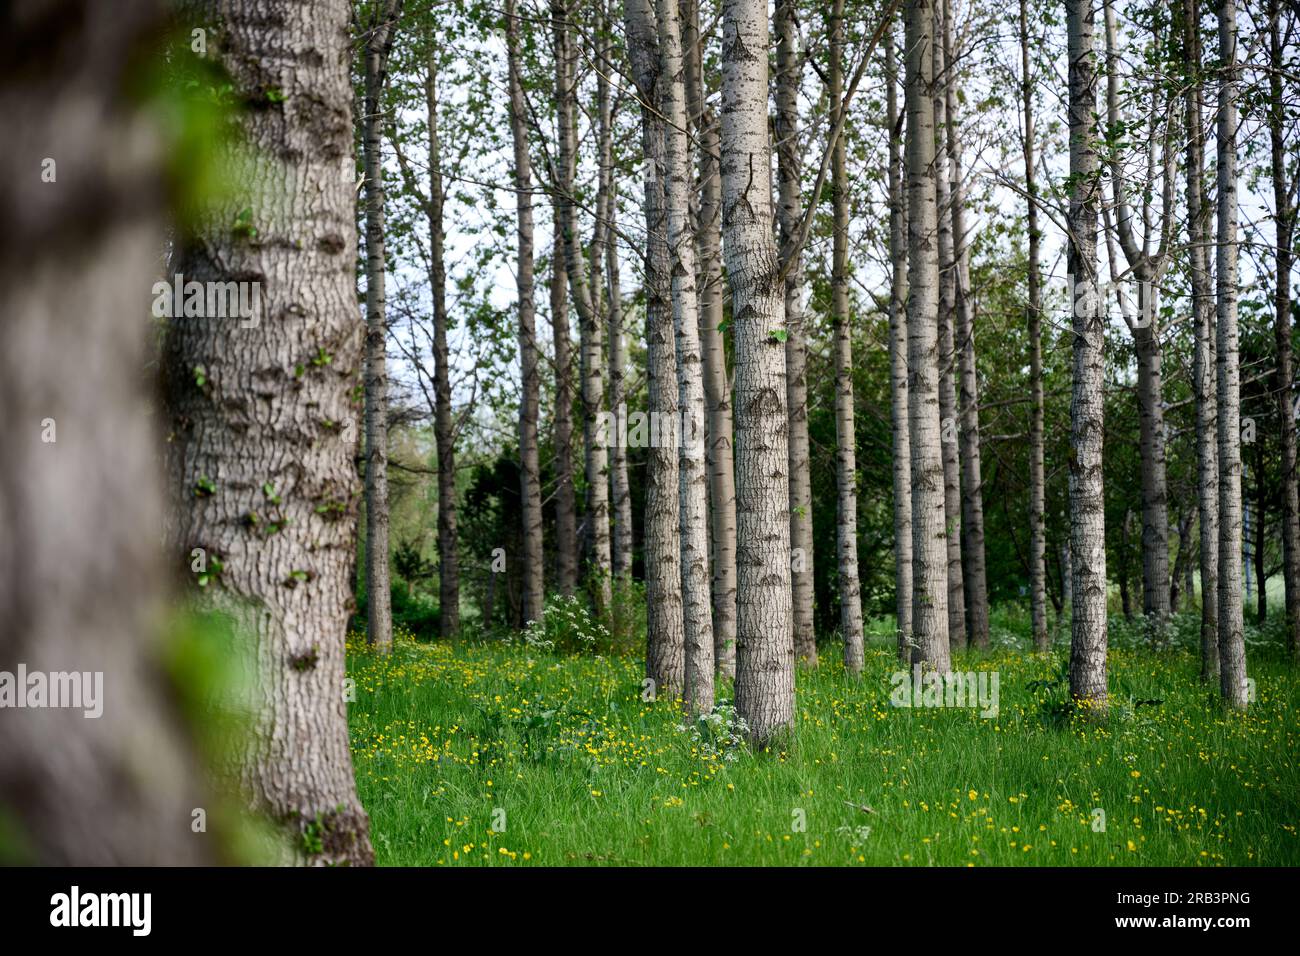 Tall trees growing on grassy field in grove Stock Photo